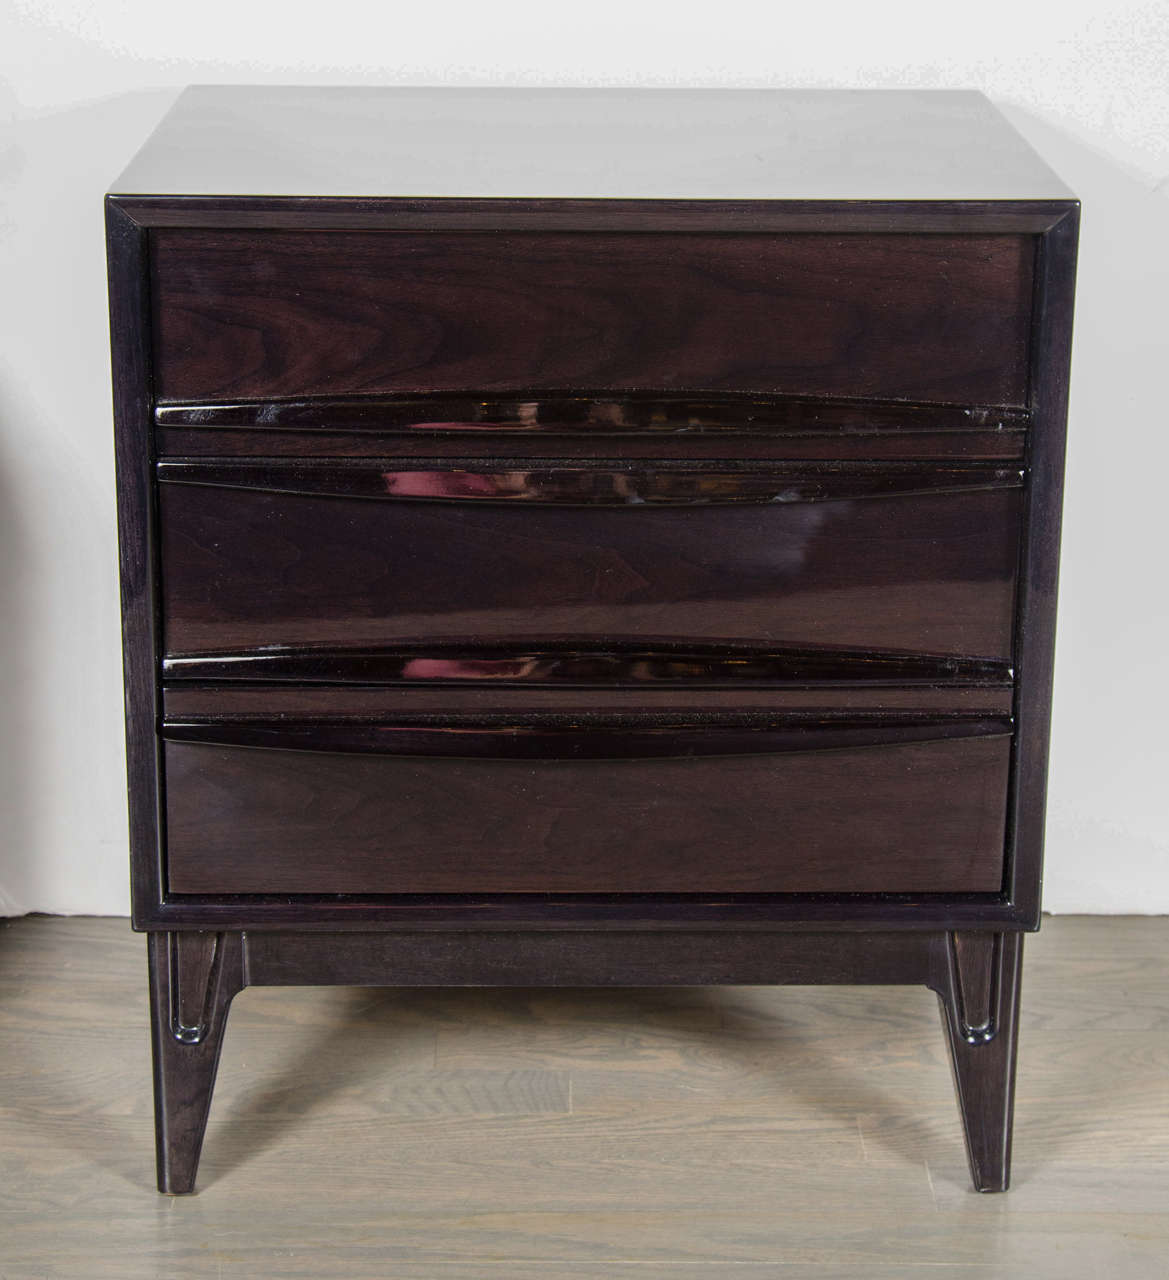 This pair of Mid-Century Modern end tables or night stands in the manner of Vladimir Kagan in ebonized walnut feature three drawers with incorporated stylistic pulls and tapered legs. Restored to mint condition.